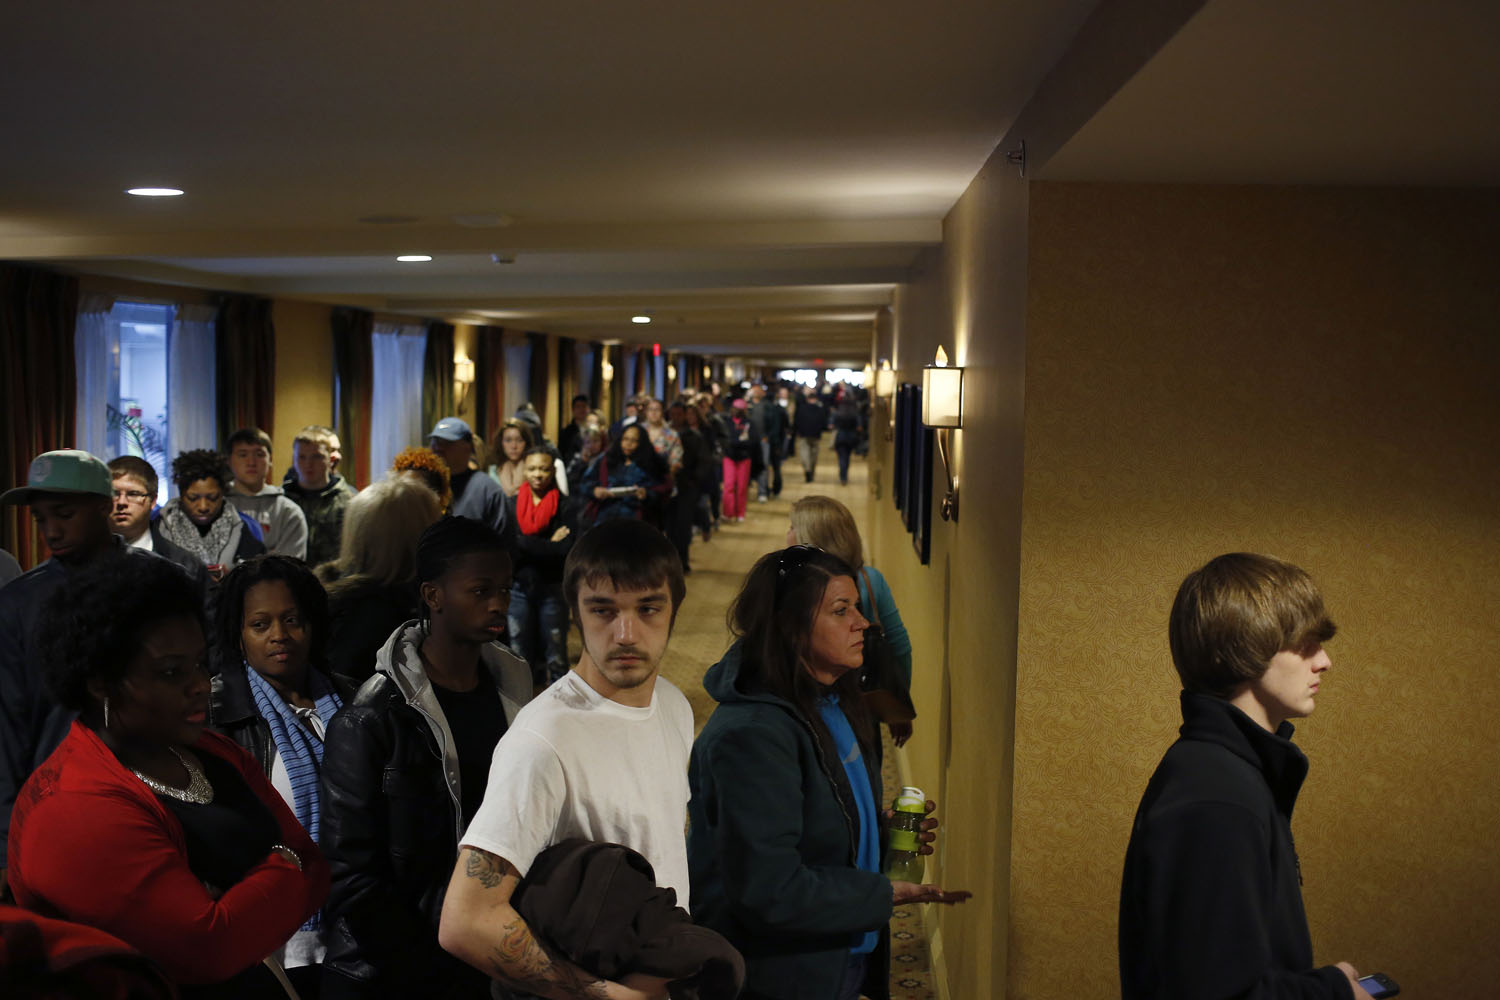 Prospective job applicants wait in line to learn about job openings at the Kentucky Kingdom Amusement Park during a job fair at the nearby Crowne Plaza Hotel in Louisville, Ky., Jan. 4, 2013. (Luke Sharett&mdash;Bloomberg/Getty Images)